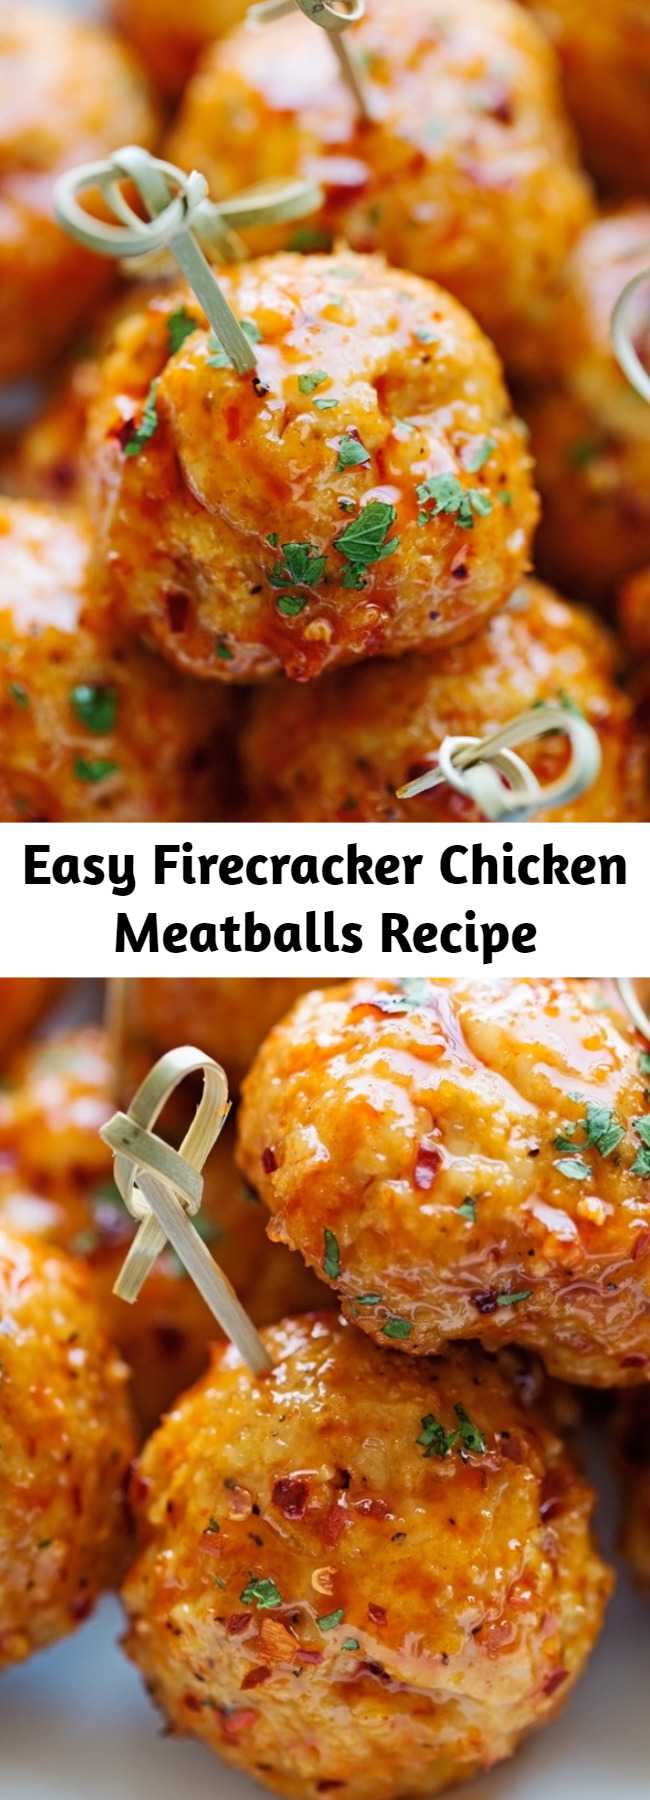 Easy Firecracker Chicken Meatballs Recipe - This is my favorite way to eat chicken meatballs. They’re spiced up with a sweet, savory, and spicy firecracker sauce. They’re tender, filled with flavor, and require minimum work!